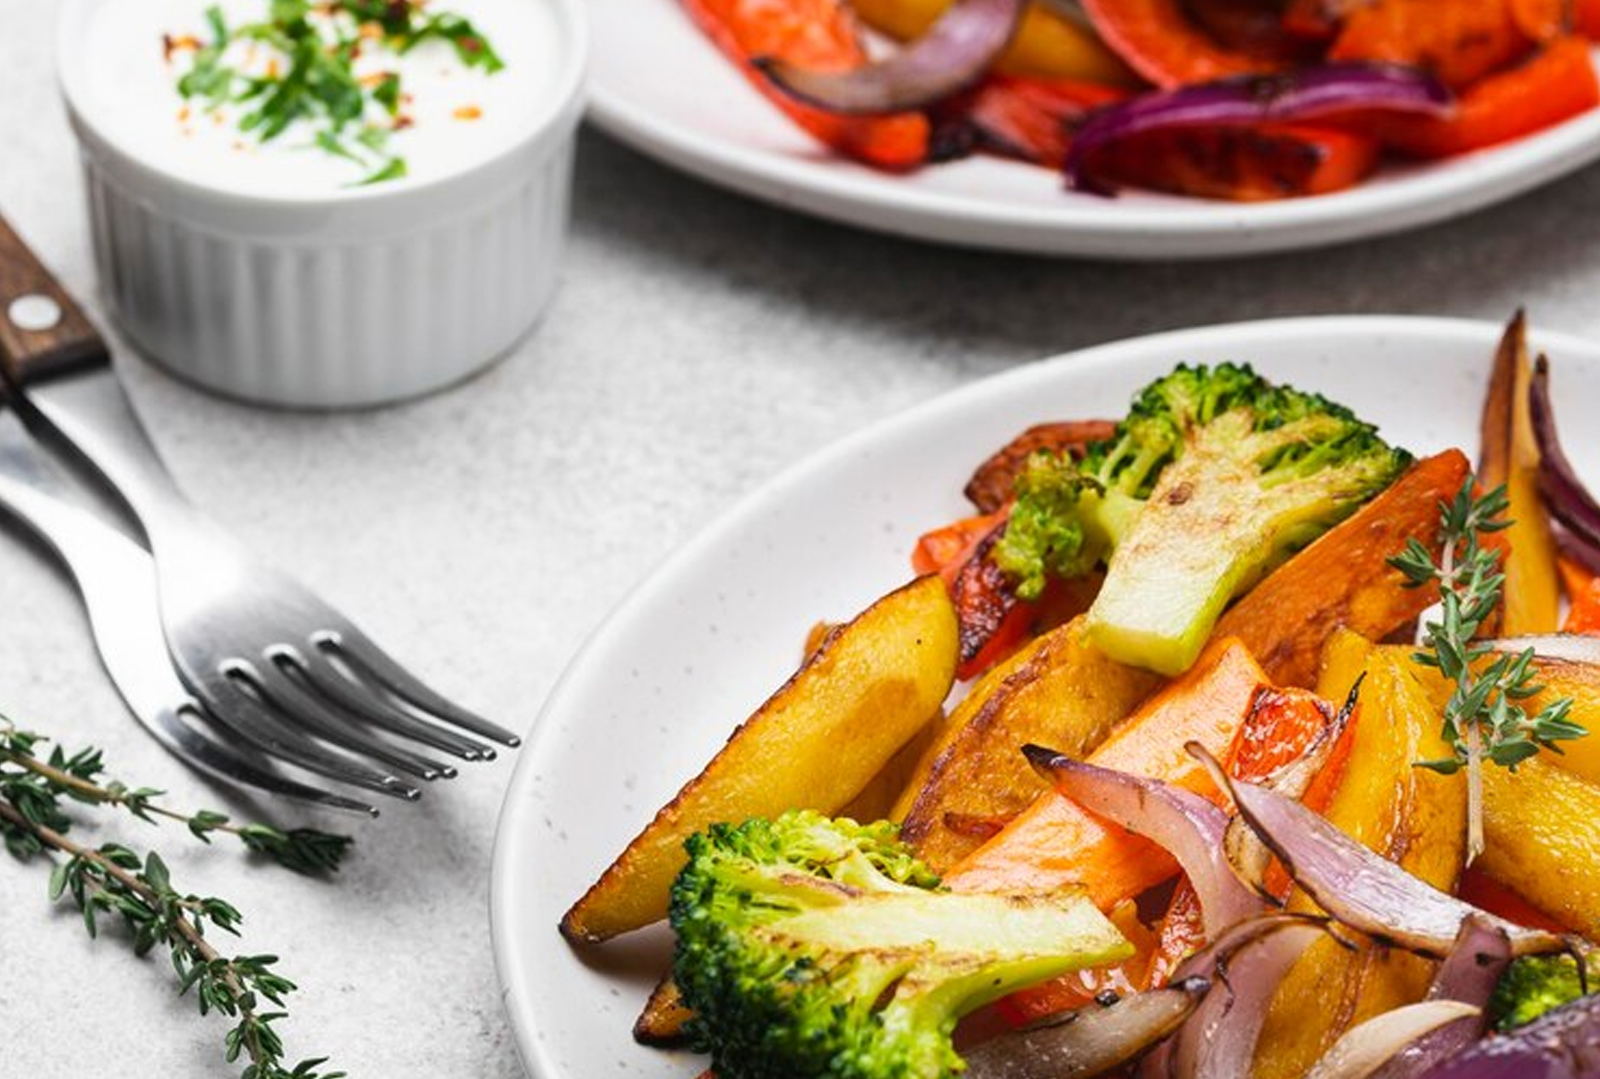 Roasted vegetables with cottage cheese sauce